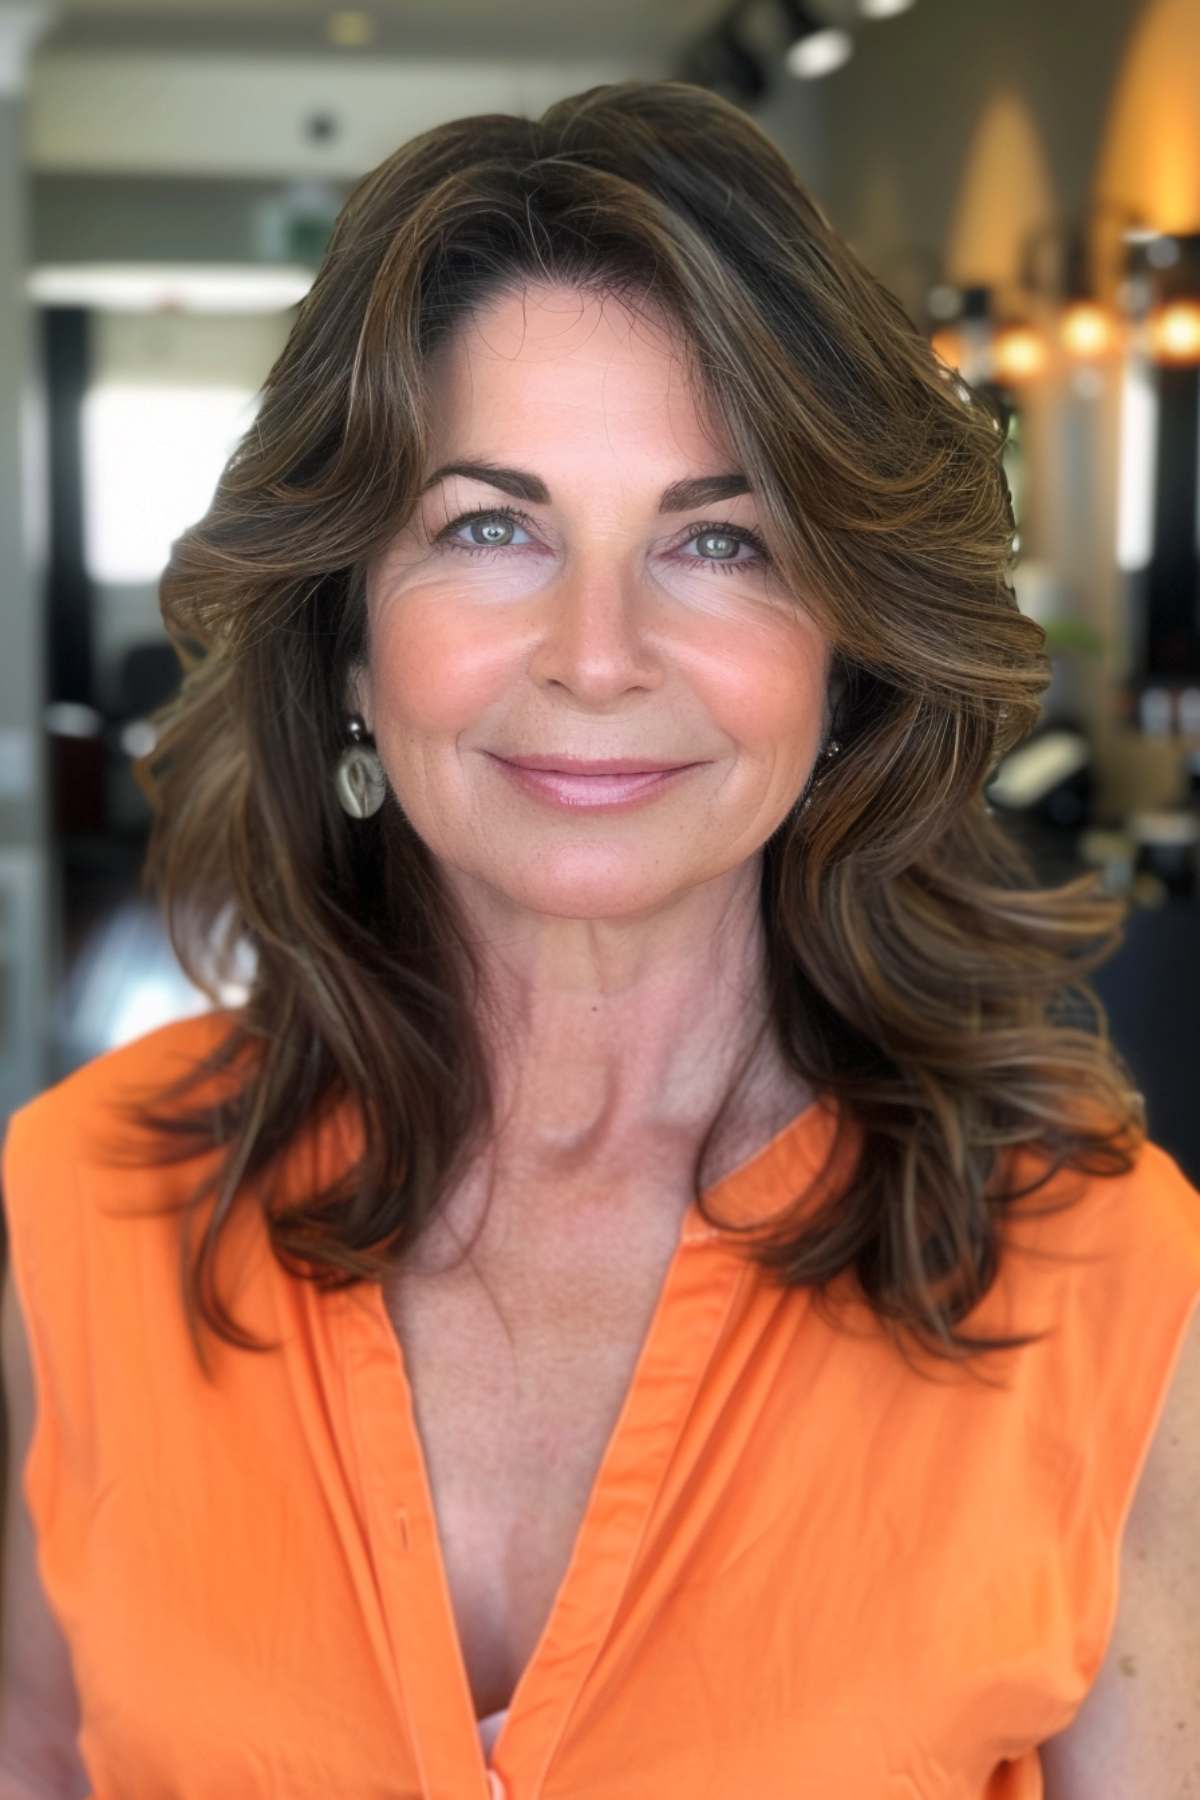 Medium-length layered haircut with soft waves and rich brunette tones on a mature woman, styled elegantly in a salon setting.